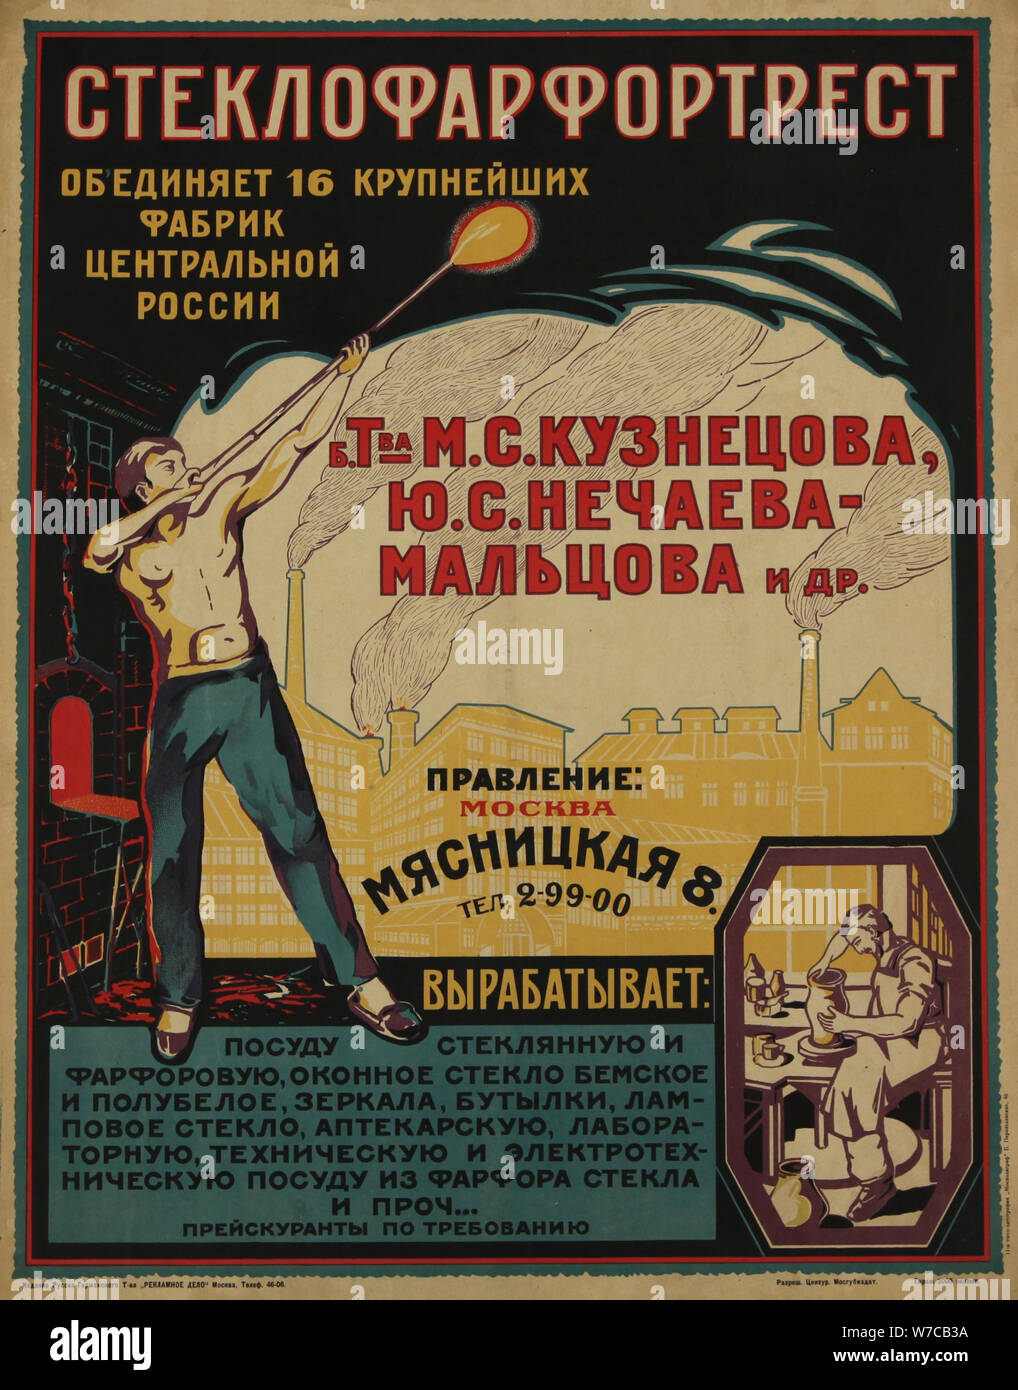 Advertising Poster for the Glass and Porcelain Industry, ca 1921-1923. Stock Photo